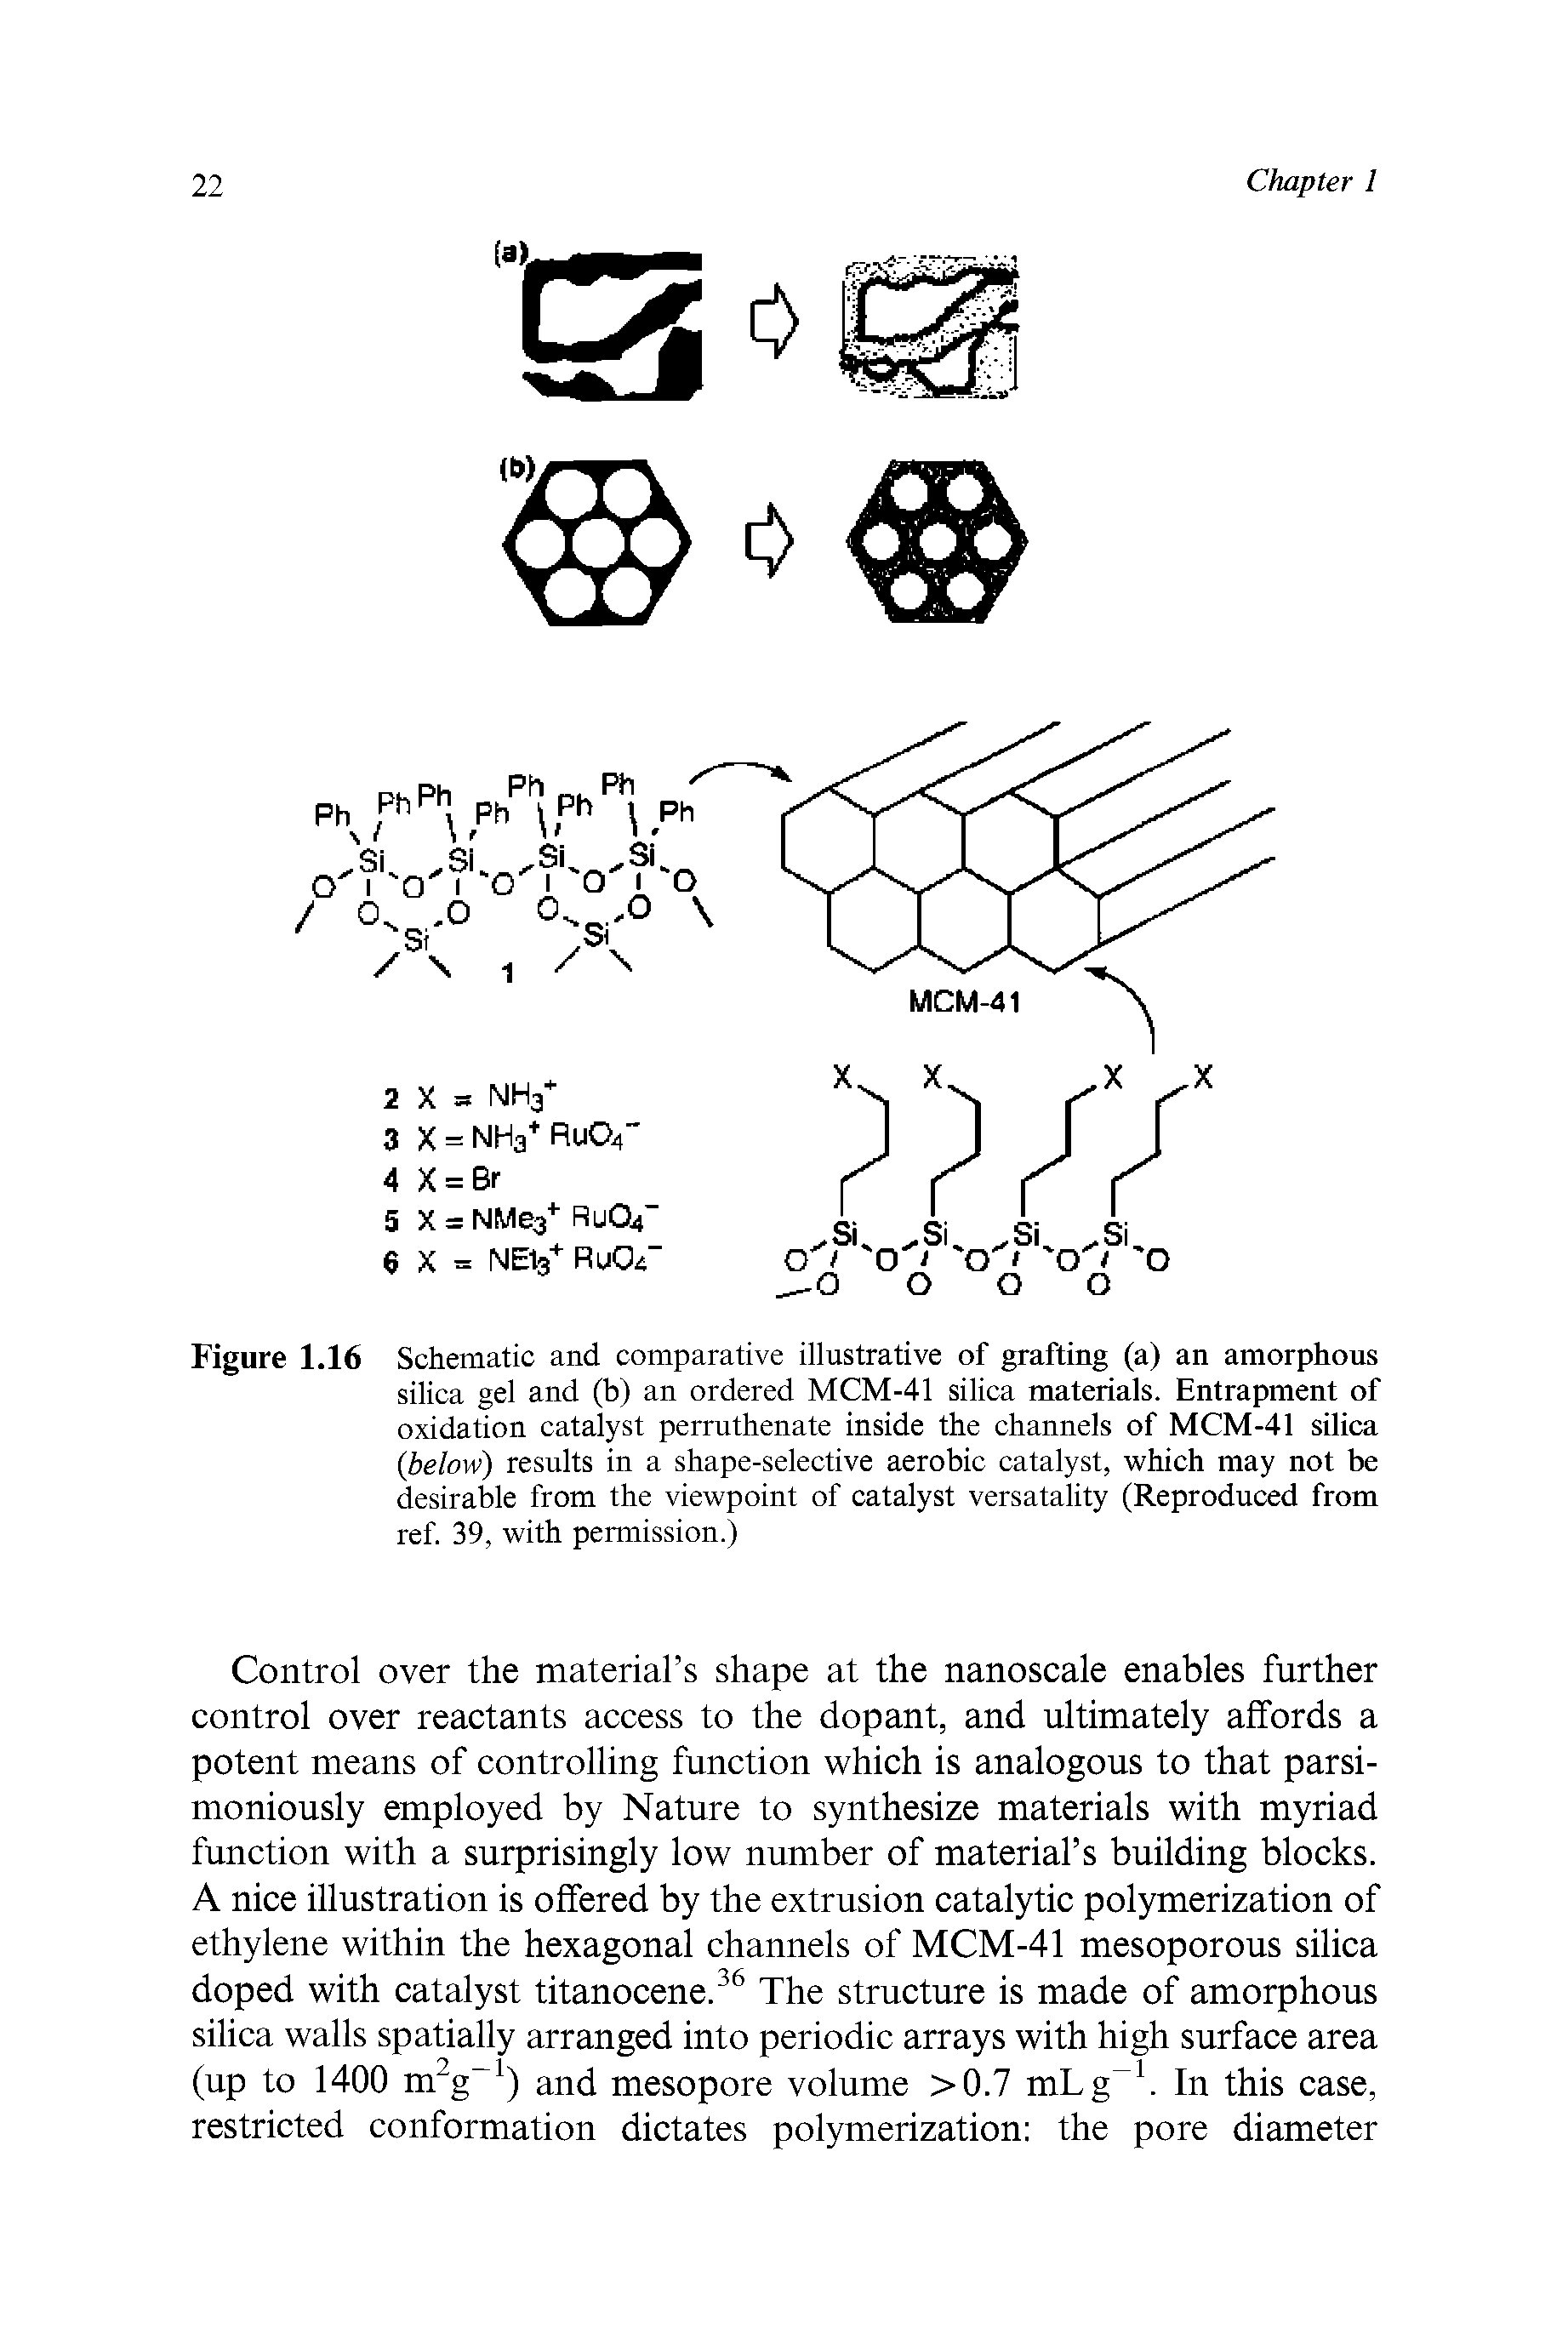 Figure 1.16 Schematic and comparative illustrative of grafting (a) an amorphous silica gel and (b) an ordered MCM-41 silica materials. Entrapment of oxidation catalyst perruthenate inside the channels of MCM-41 silica (below) results in a shape-selective aerobic catalyst, which may not be desirable from the viewpoint of catalyst versatality (Reproduced from ref. 39, with permission.)...